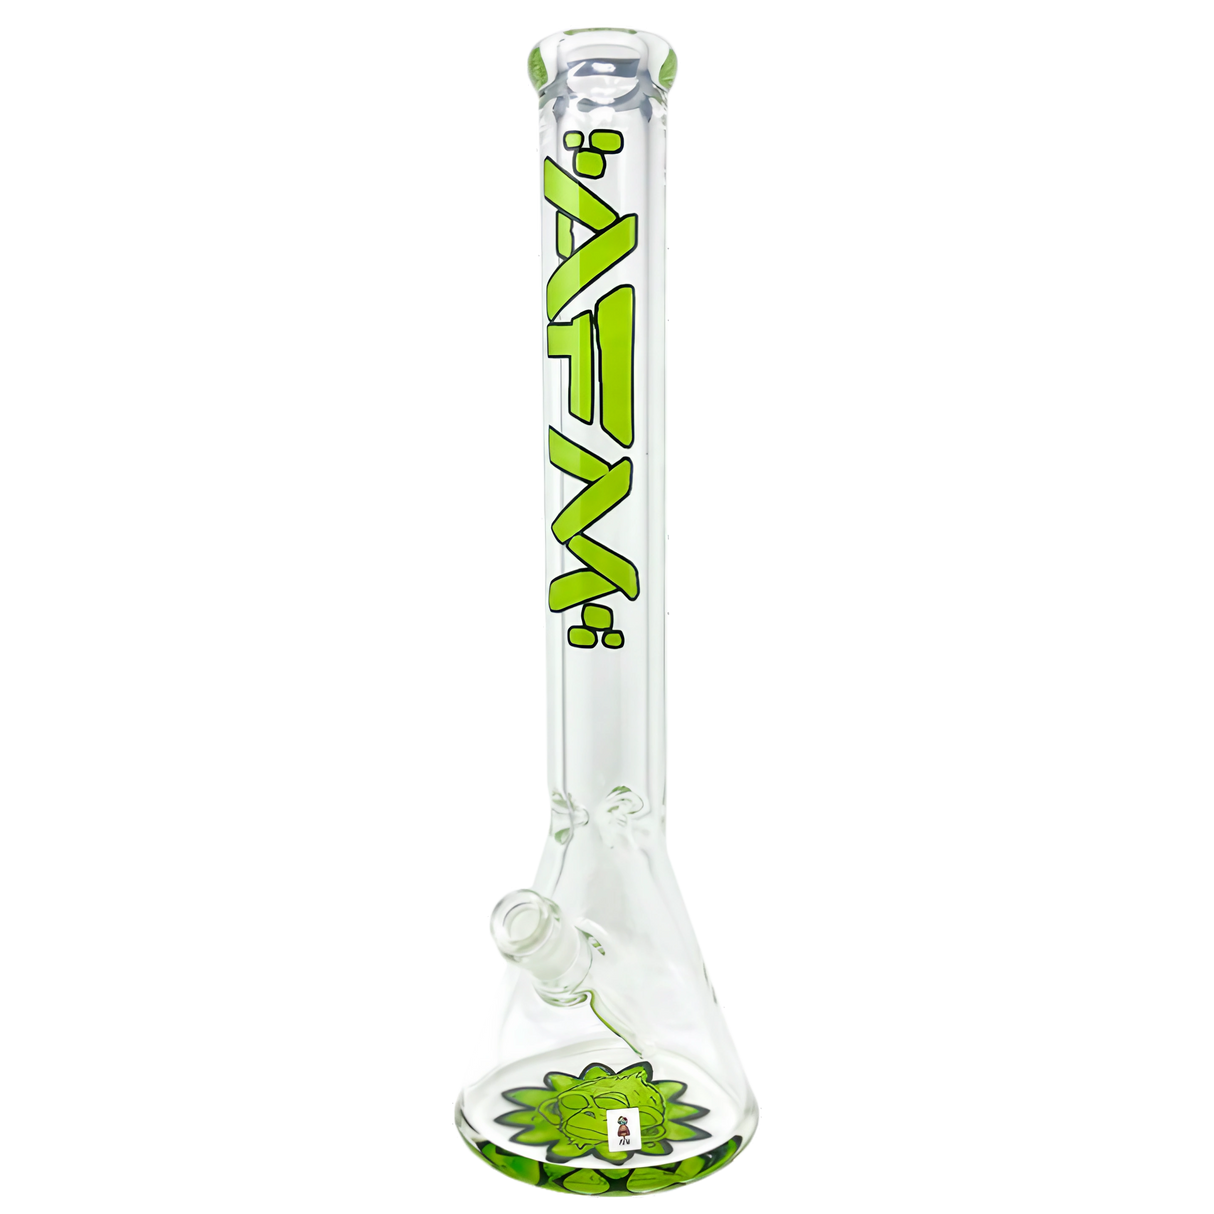 AFM Glass - The Flower Monkey Beaker Bong, 18" Tall, 9mm Thick Borosilicate Glass, Front View